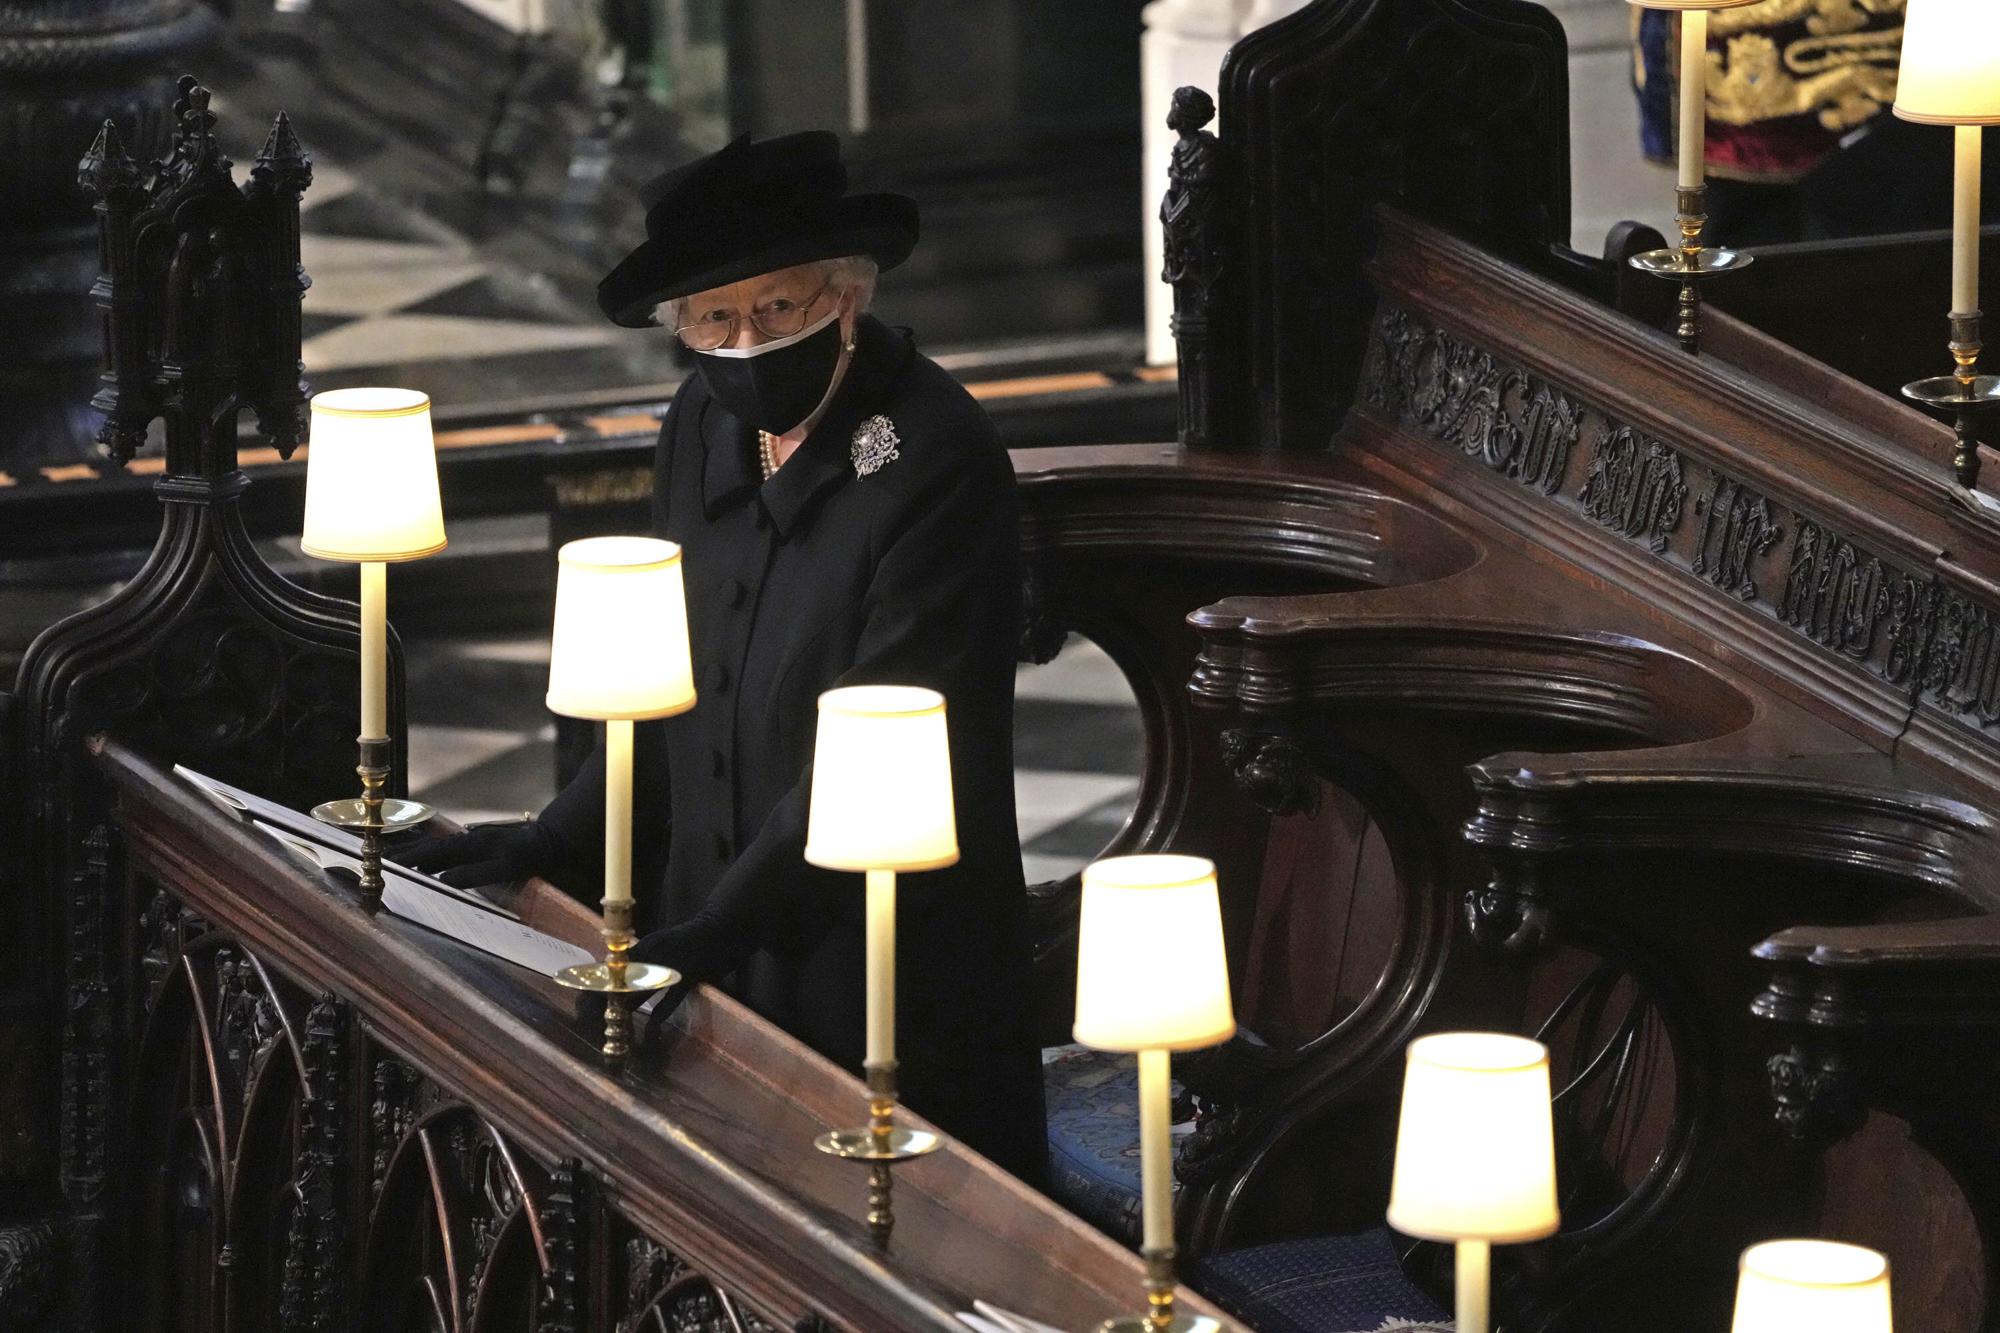 FILE - Britain's Queen Elizabeth II in St. George's Chapel during the funeral of Prince Philip, the man who had been by her side for 73 years, at Windsor Castle, Windsor, England, April 17, 2021. Queen Elizabeth II, Britain’s longest-reigning monarch and a rock of stability across much of a turbulent century, has died. She was 96. Buckingham Palace made the announcement in a statement on Thursday Sept. 8, 2022 (Yui Mok/Pool via AP, File)